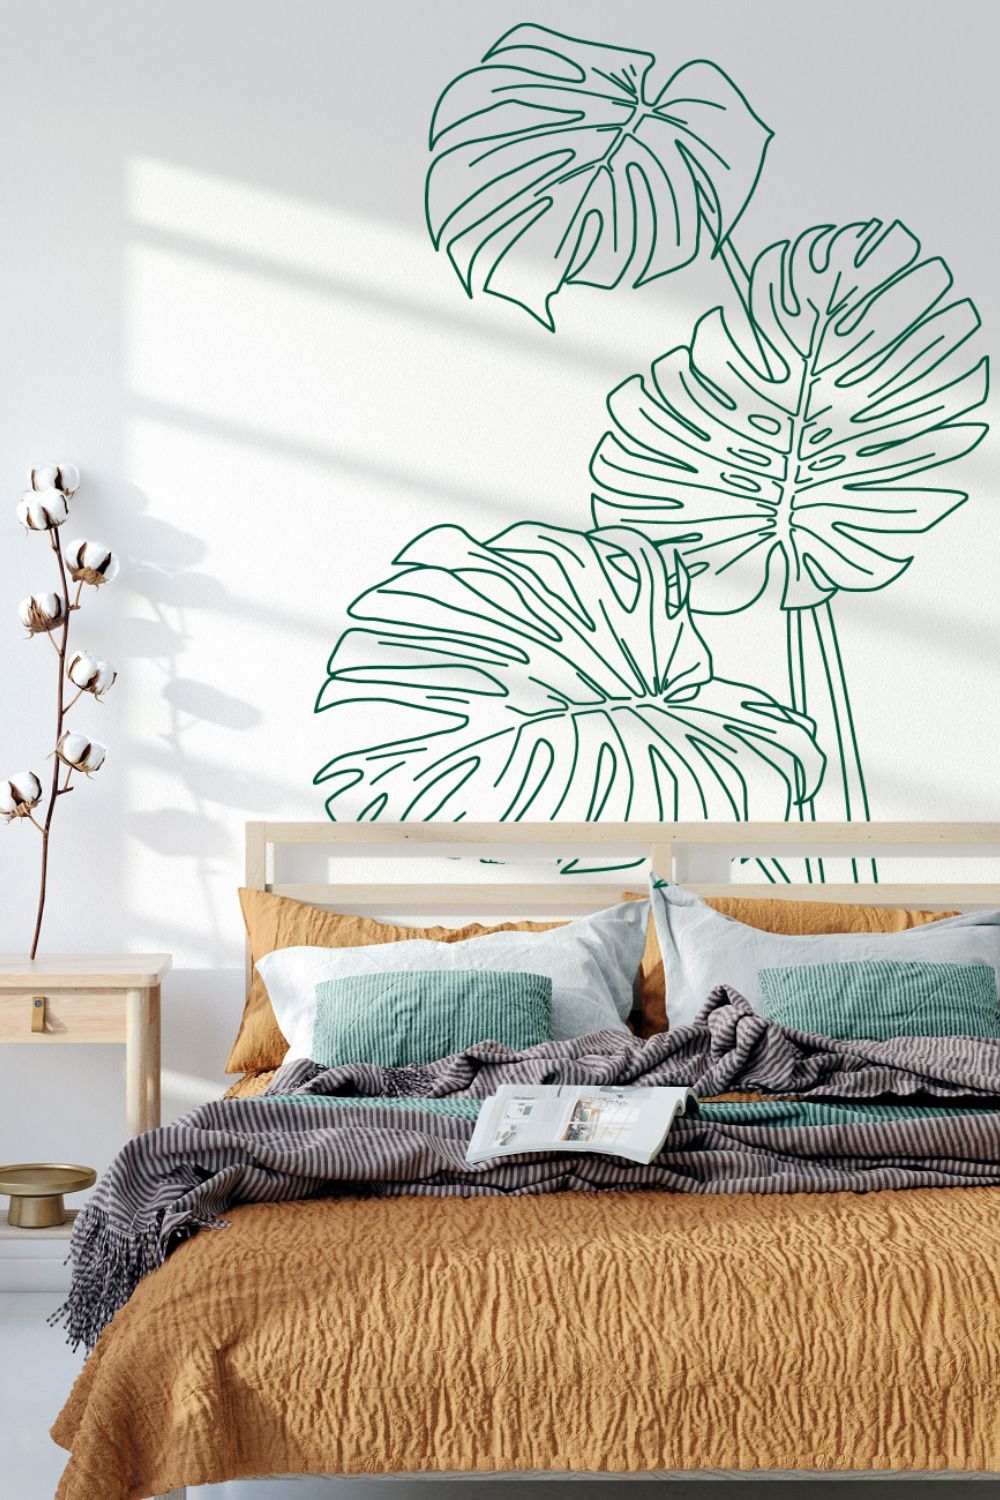 Bedroom Wall Decals Design Create a Stunning Statement with Creative Wall Decals for Your Bedroom